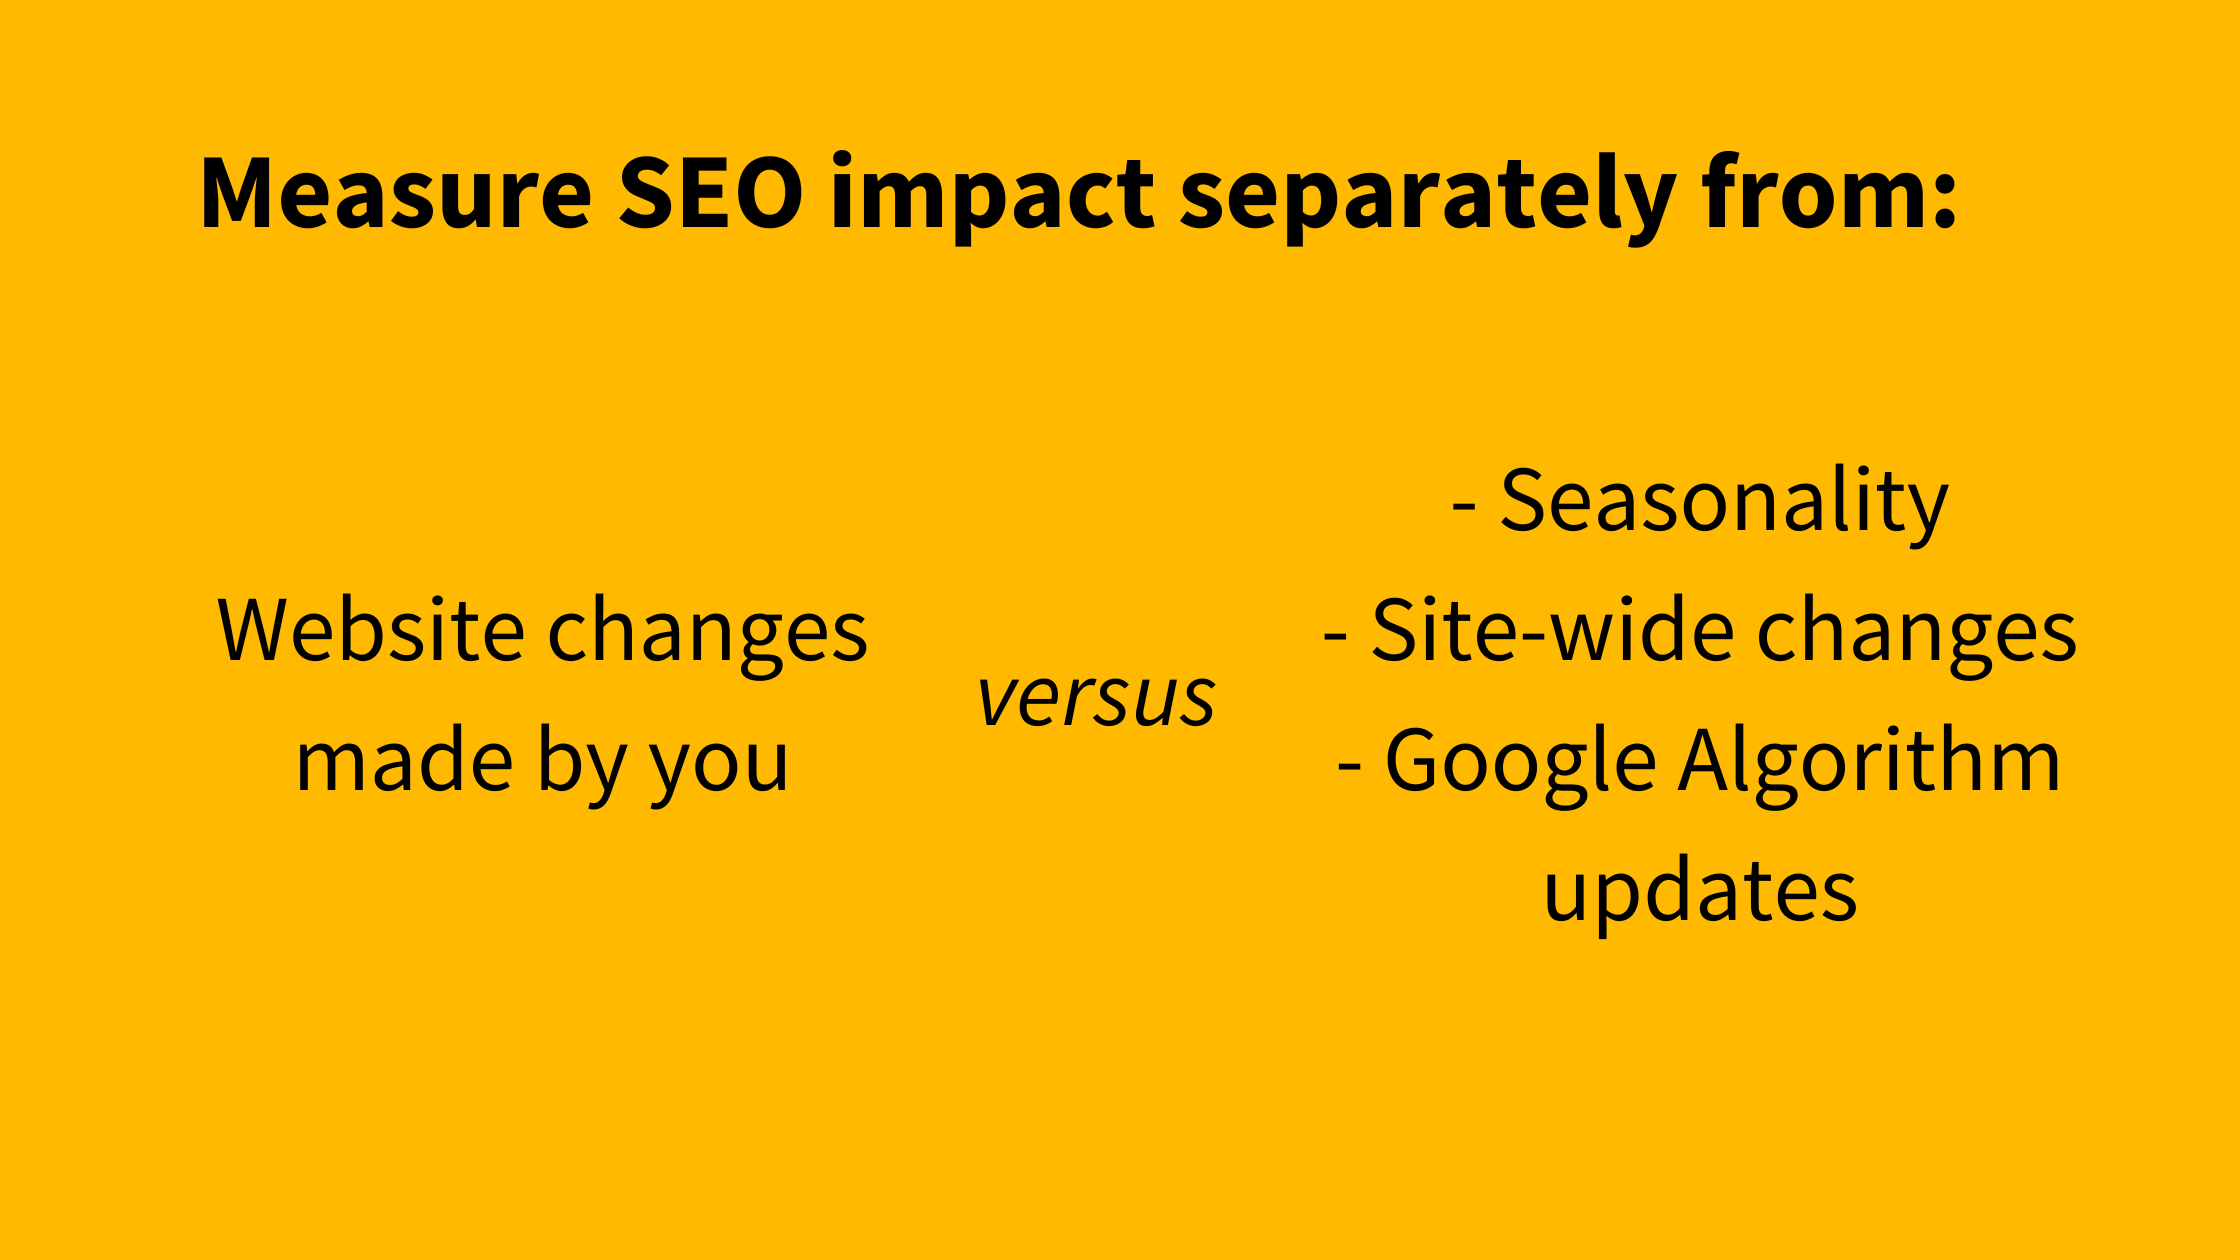 SearchPilot helps you measure SEO impact separately